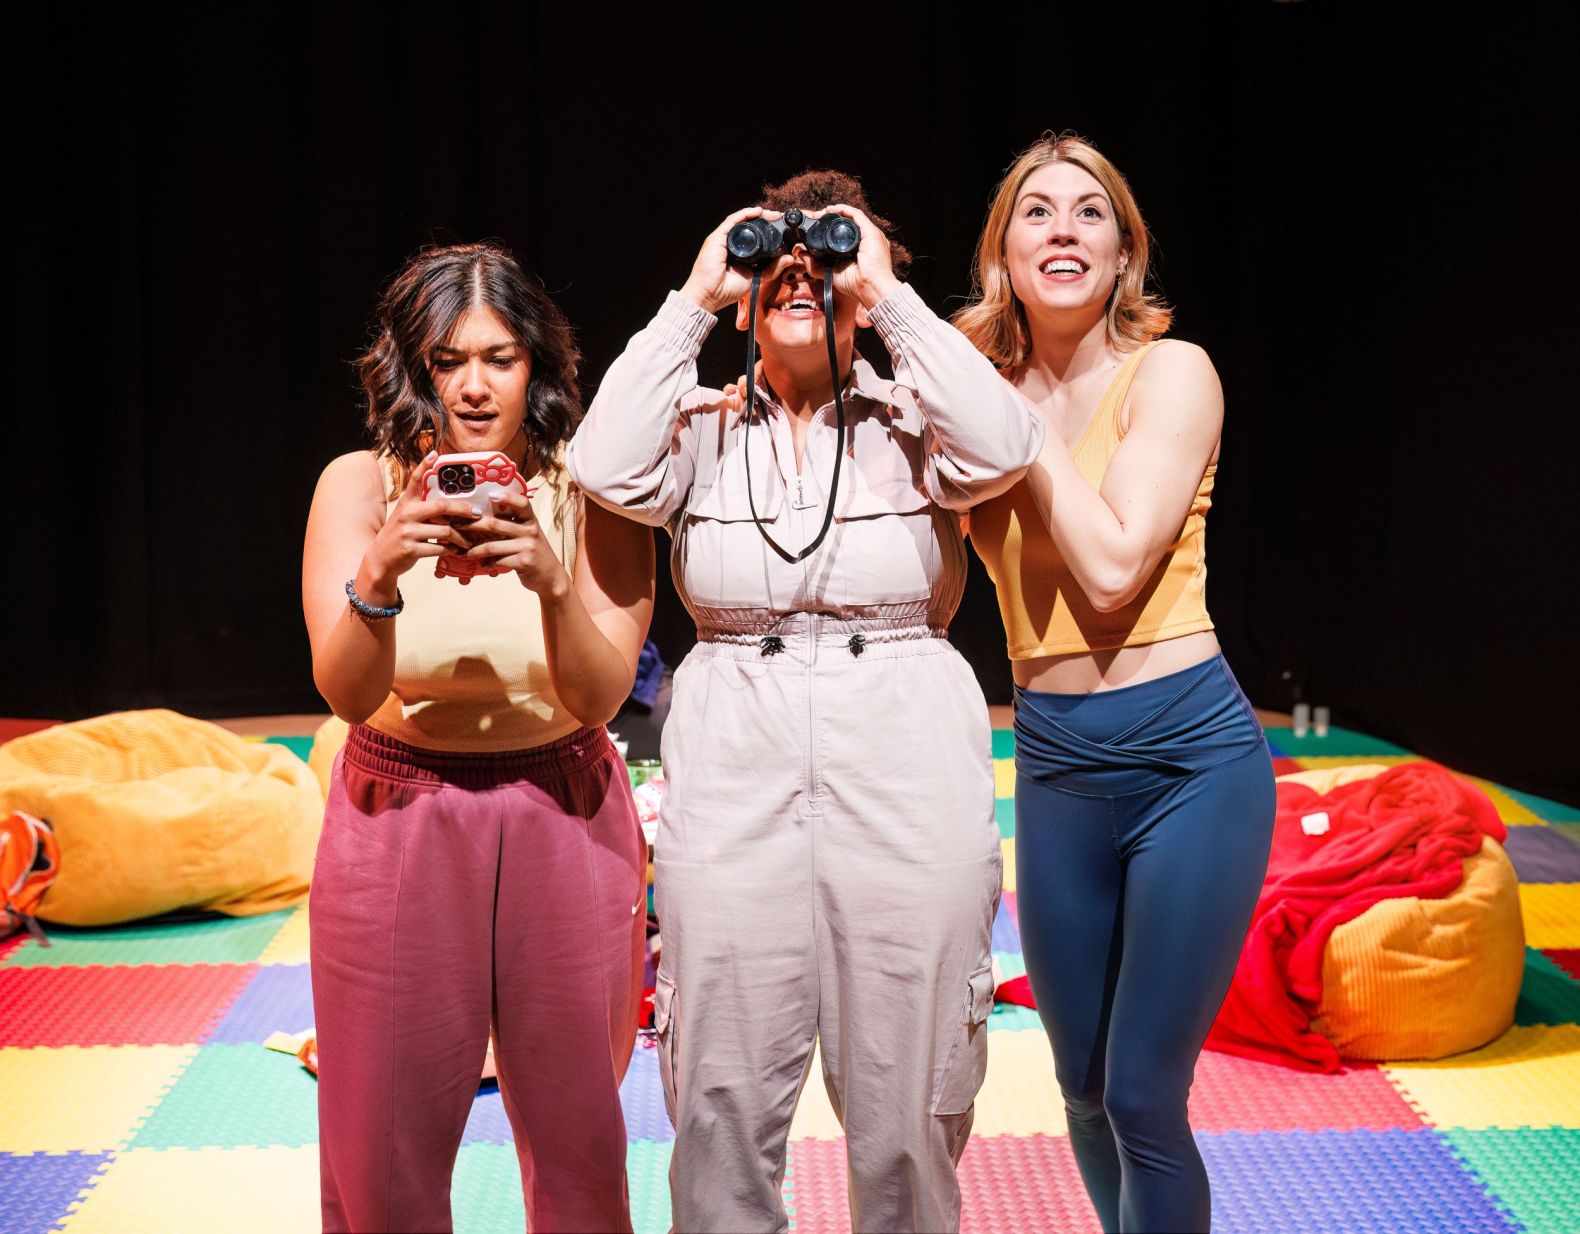 Production photo of Rotten by Emmerson & Ward - three young women are looking through binoculars at something shocking